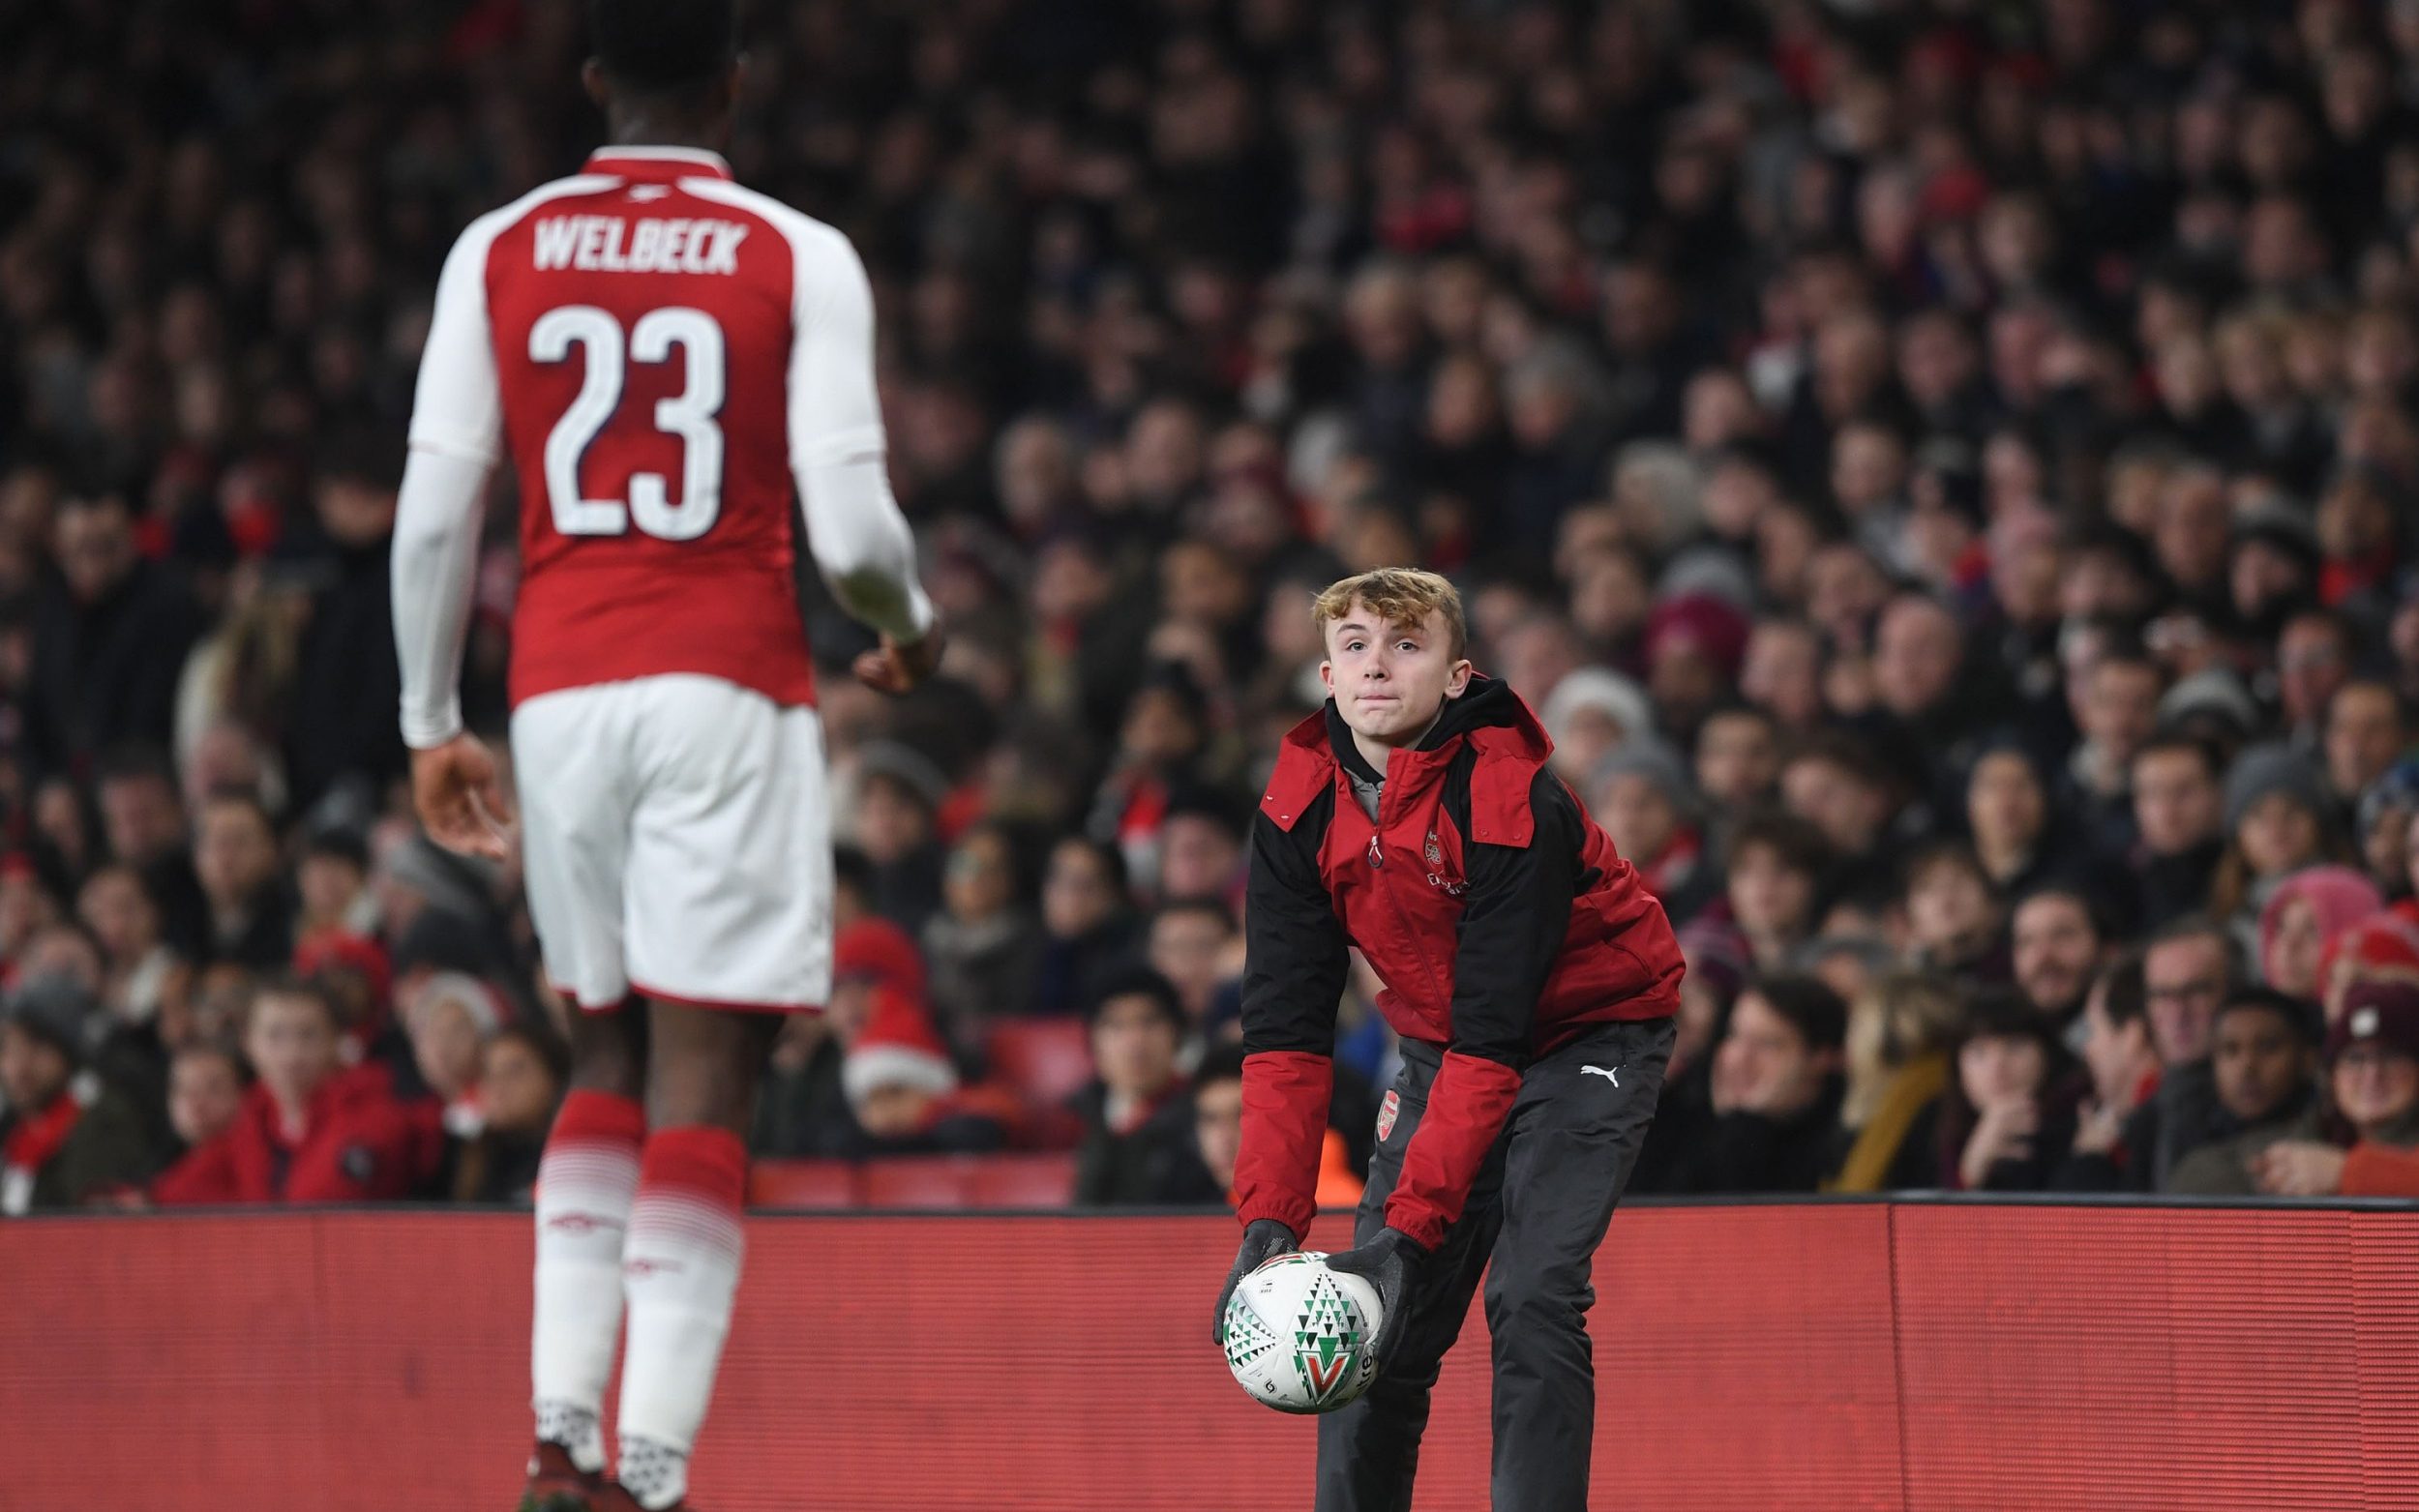 premier league tells ball boys and girls to stop returning balls to players